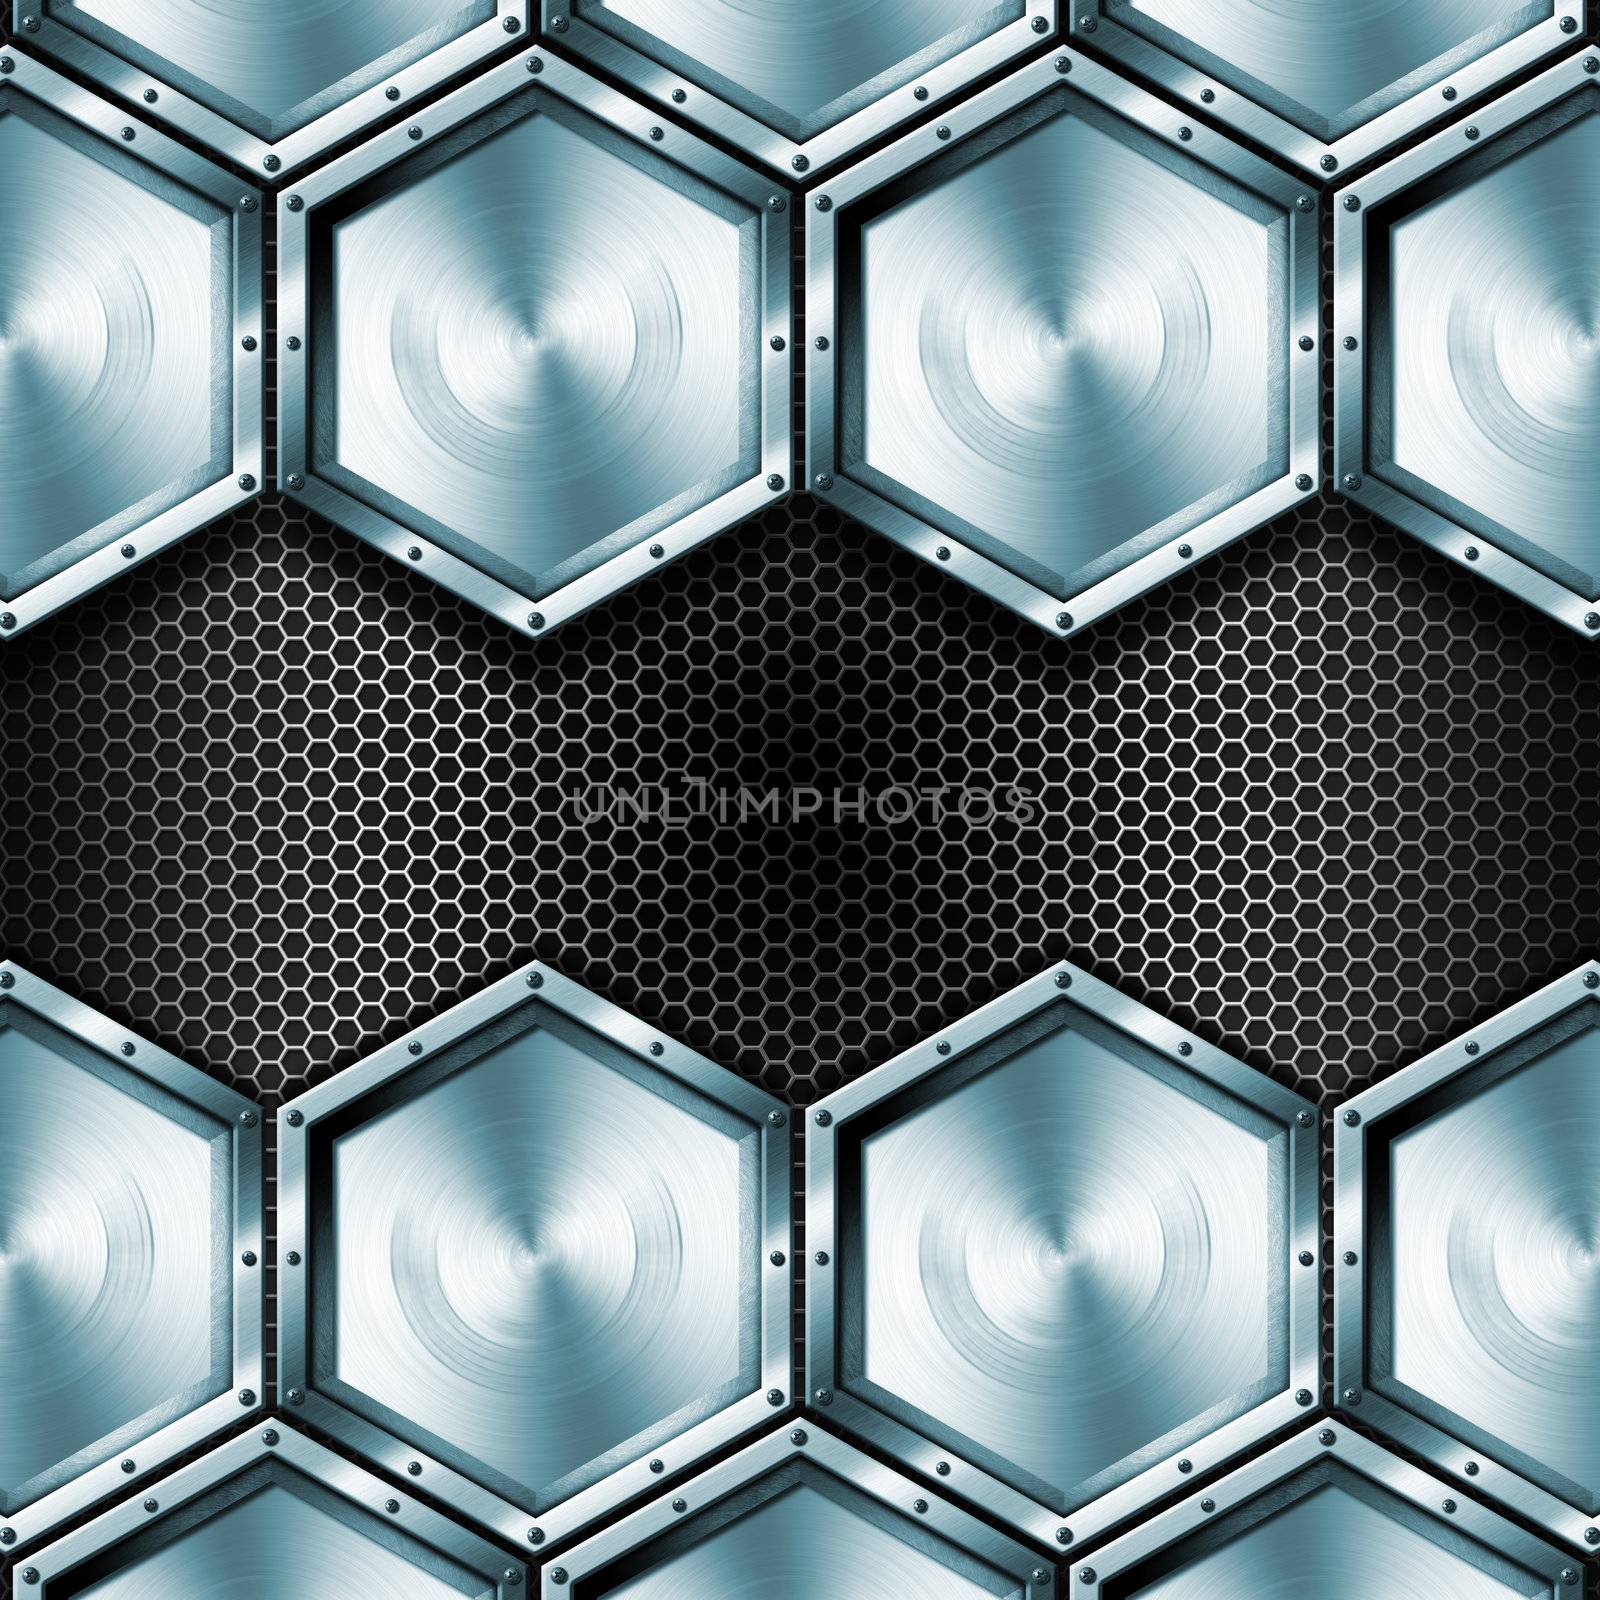 Blue and black background with metallic hexagons and screws